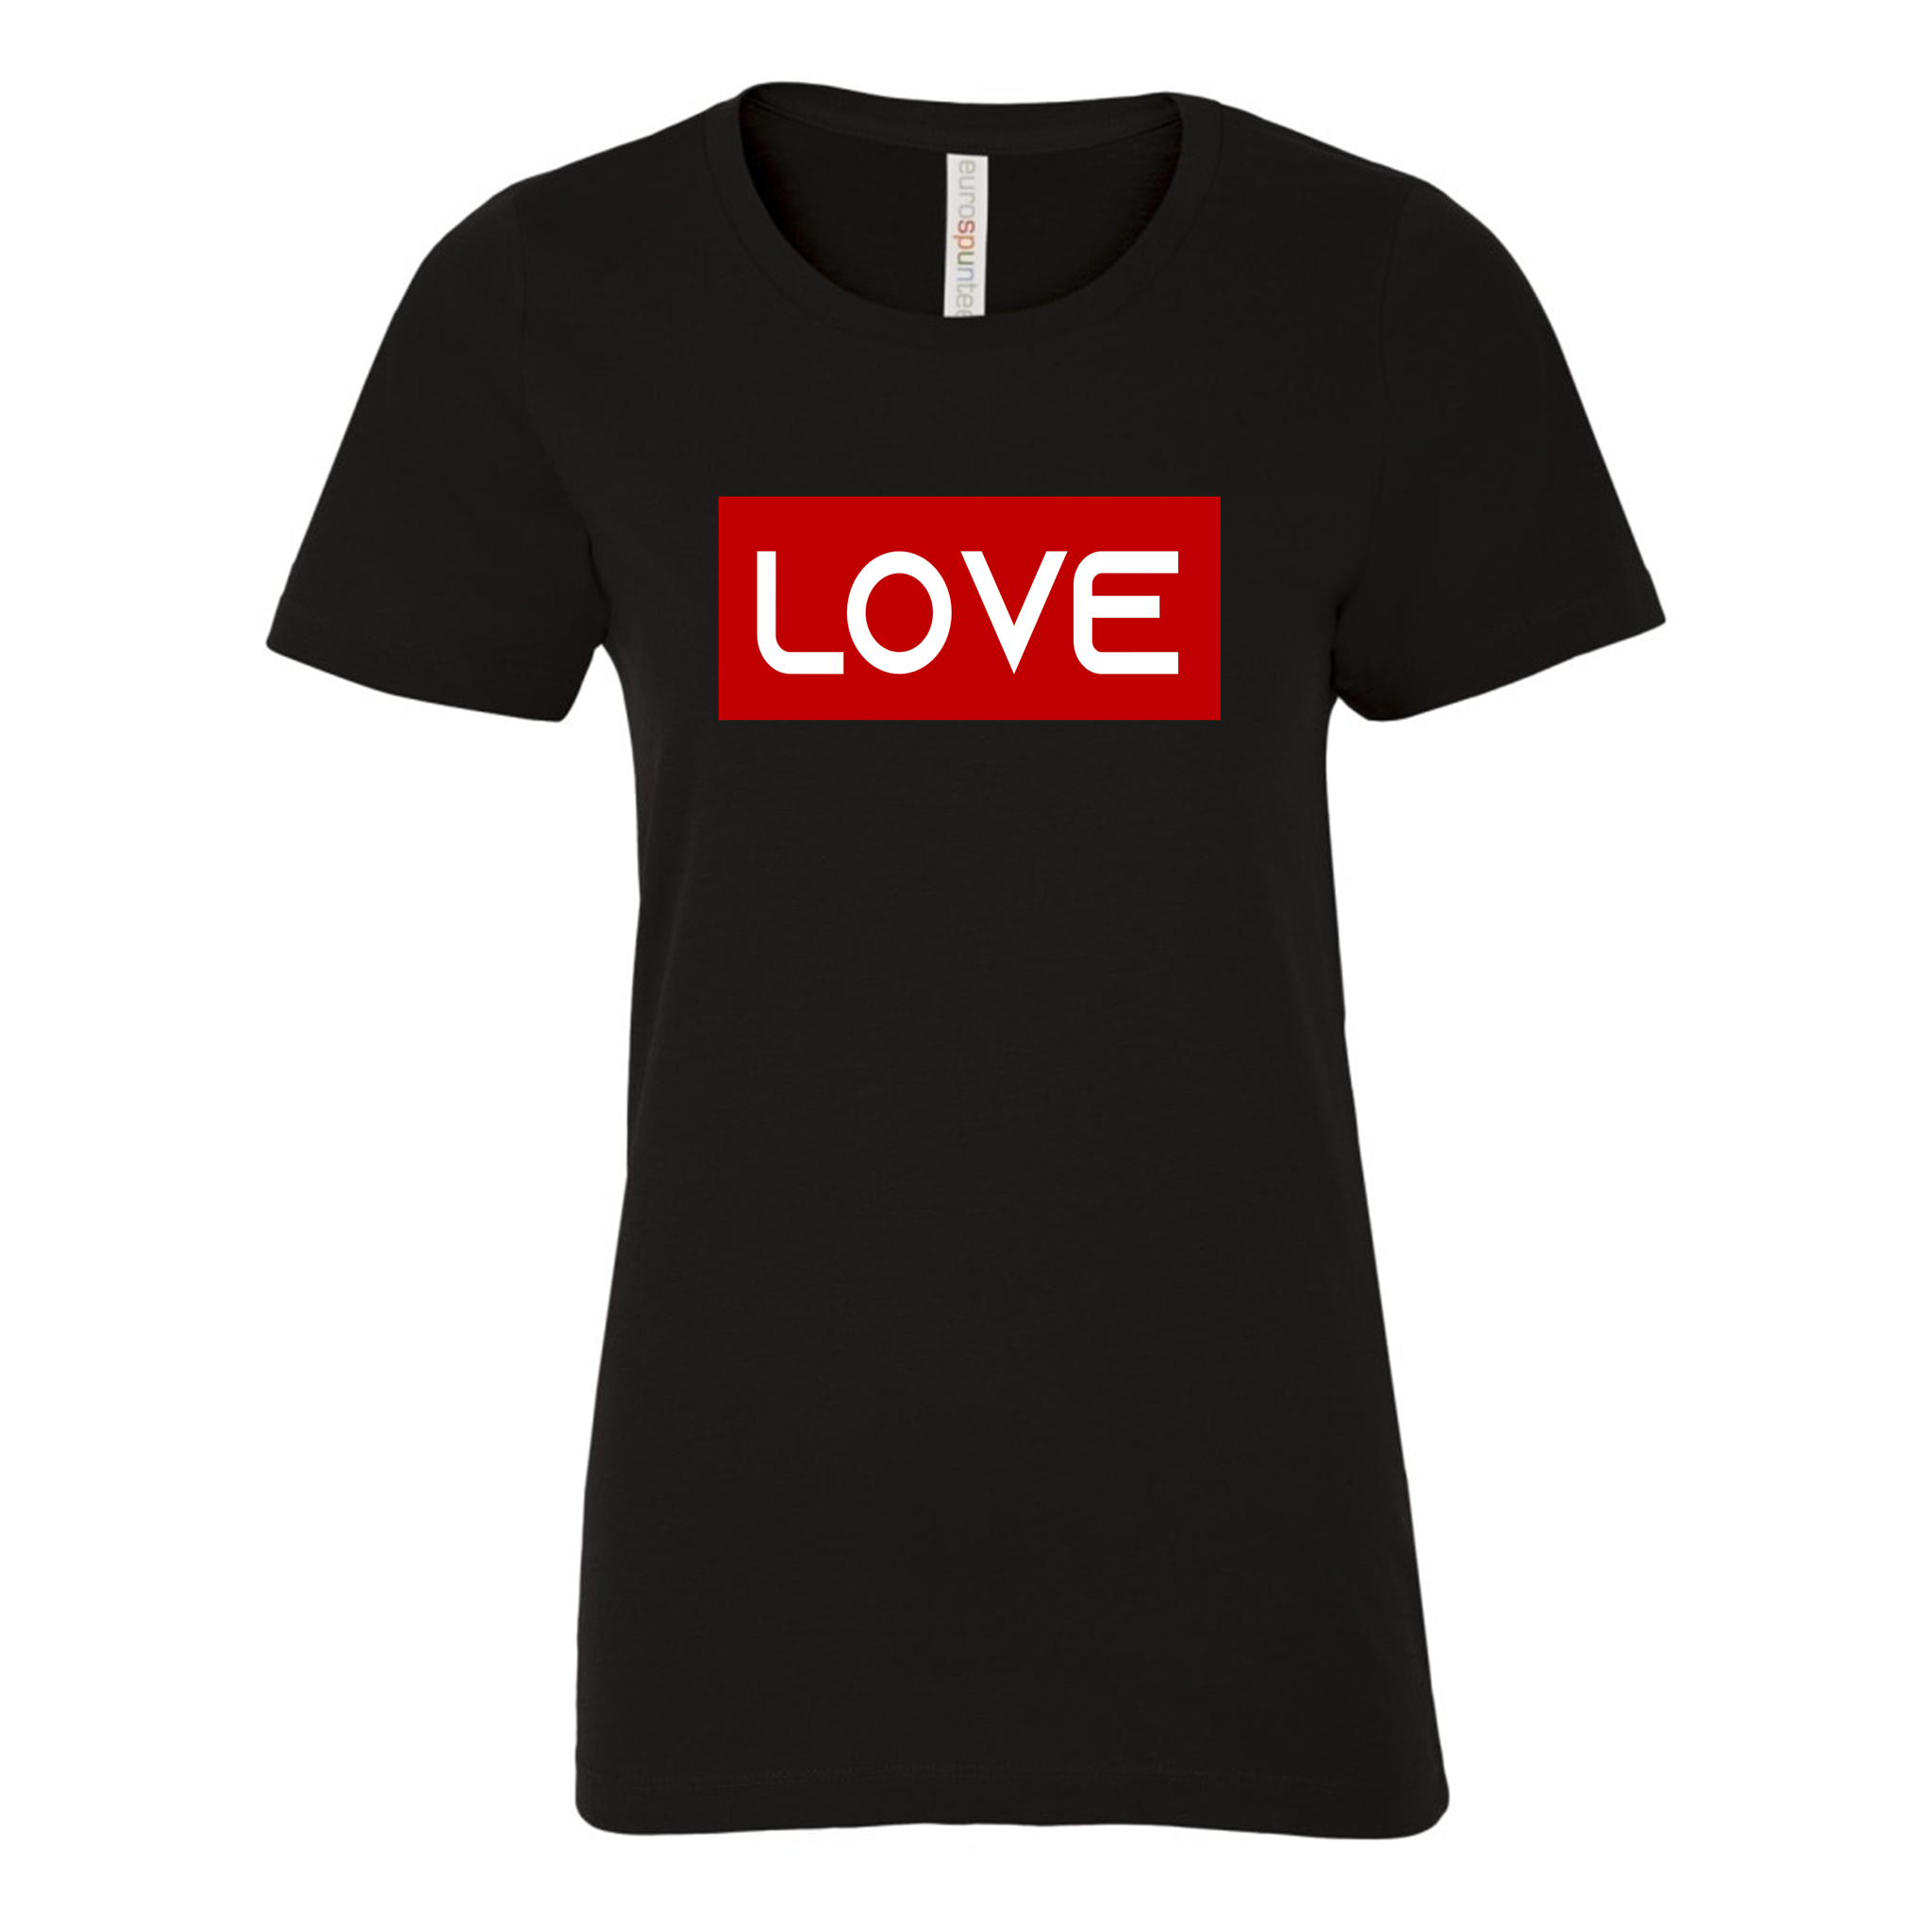 LOVE GRAPHIC T-SHIRT | VALENTINE'S DAY GIFTS | STOP DESIGN PRINT